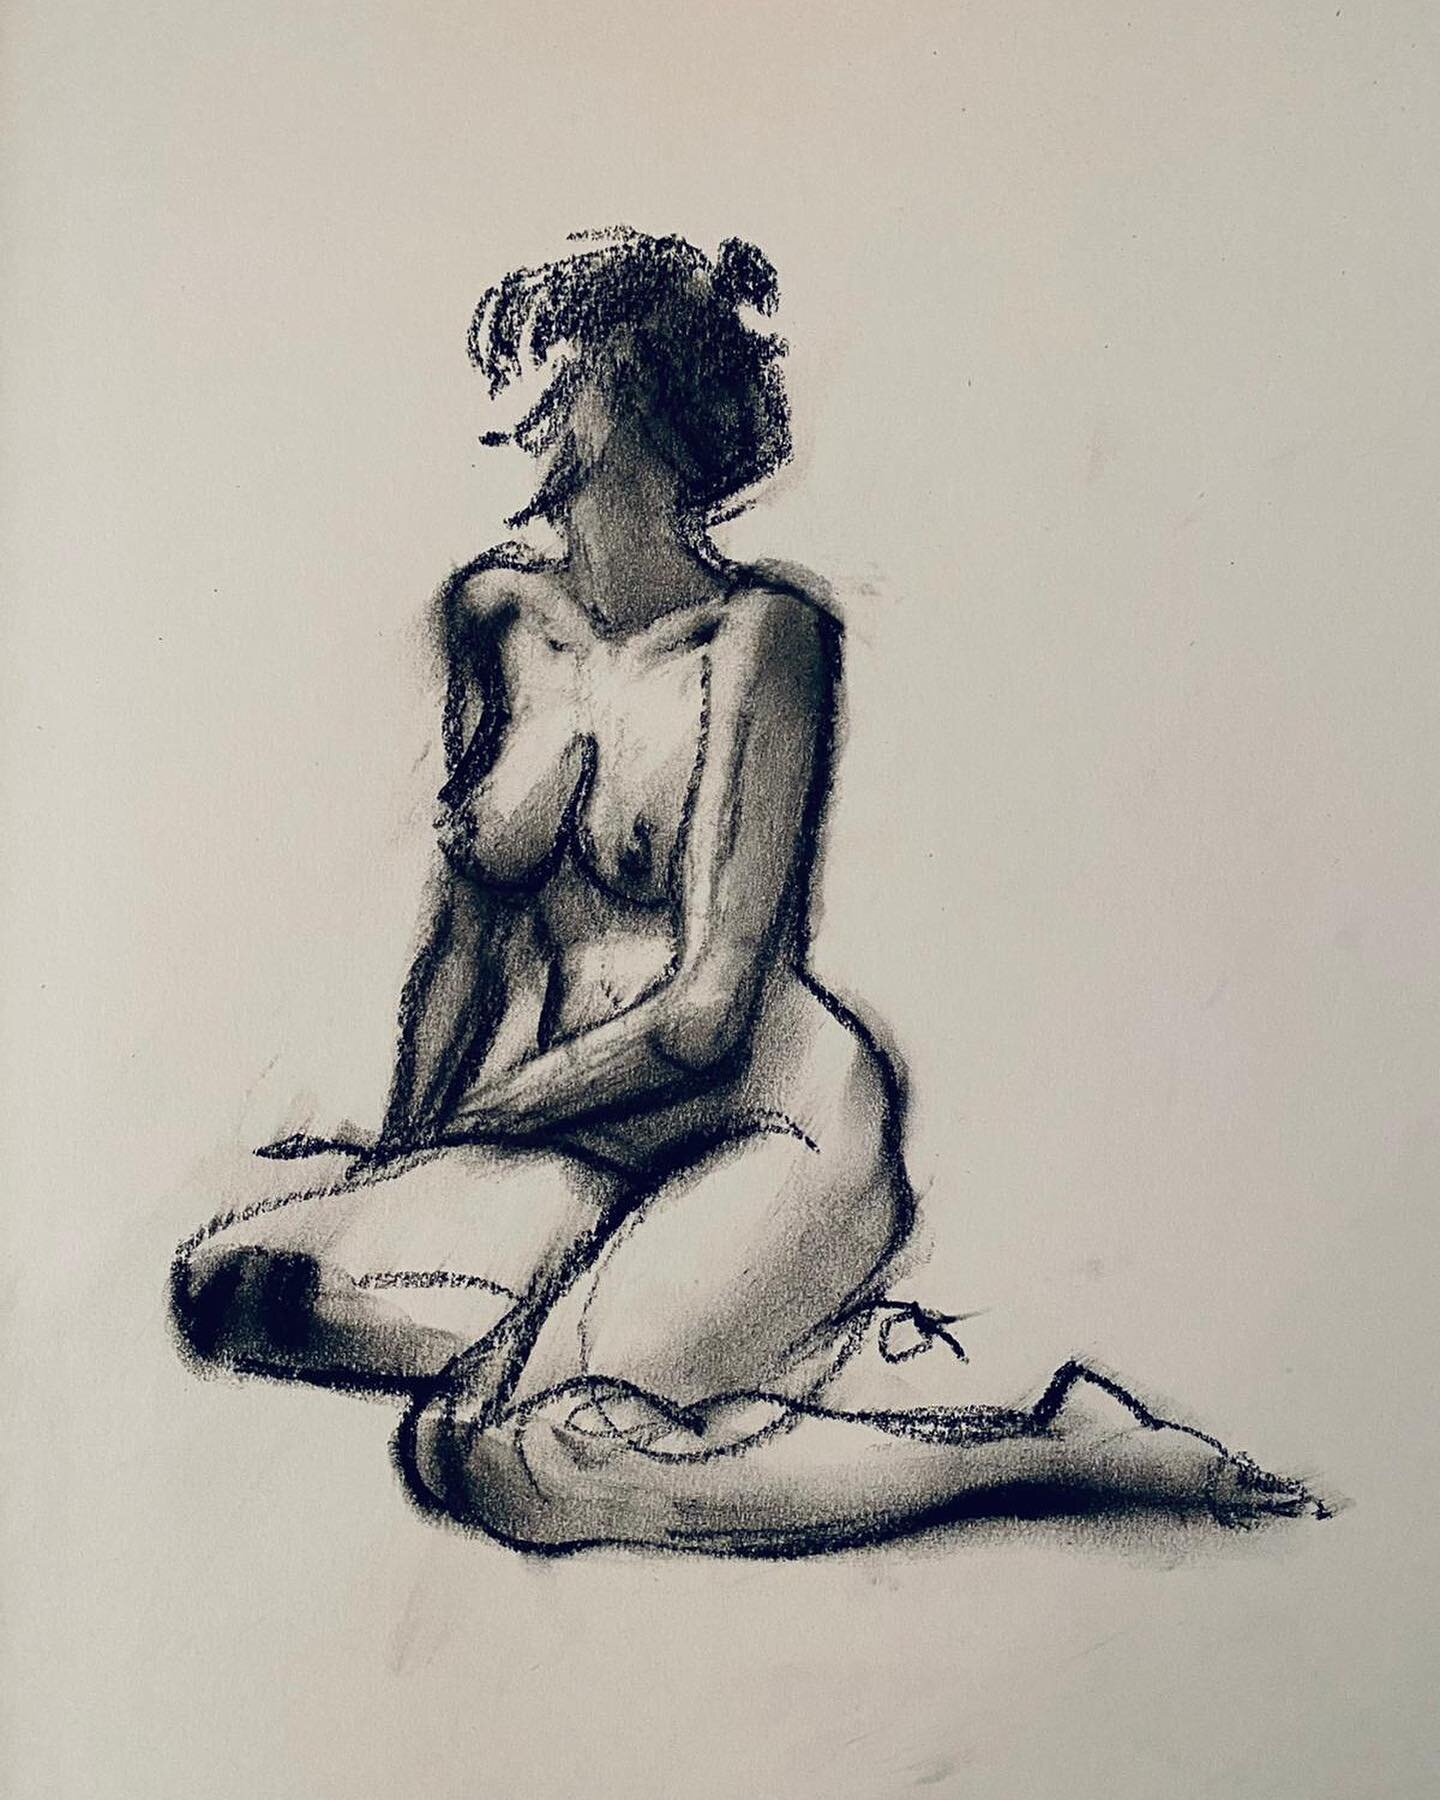 Our models Bea&rsquo;s favourite drawing of her last week by @thenakedswami ~ stunning &lsquo;real&rsquo; charcoal 

#Drawn #chorus #life #drawing #lockdown #art #Model #session #nights #evening #quarantine #charcoal #nude #sketch